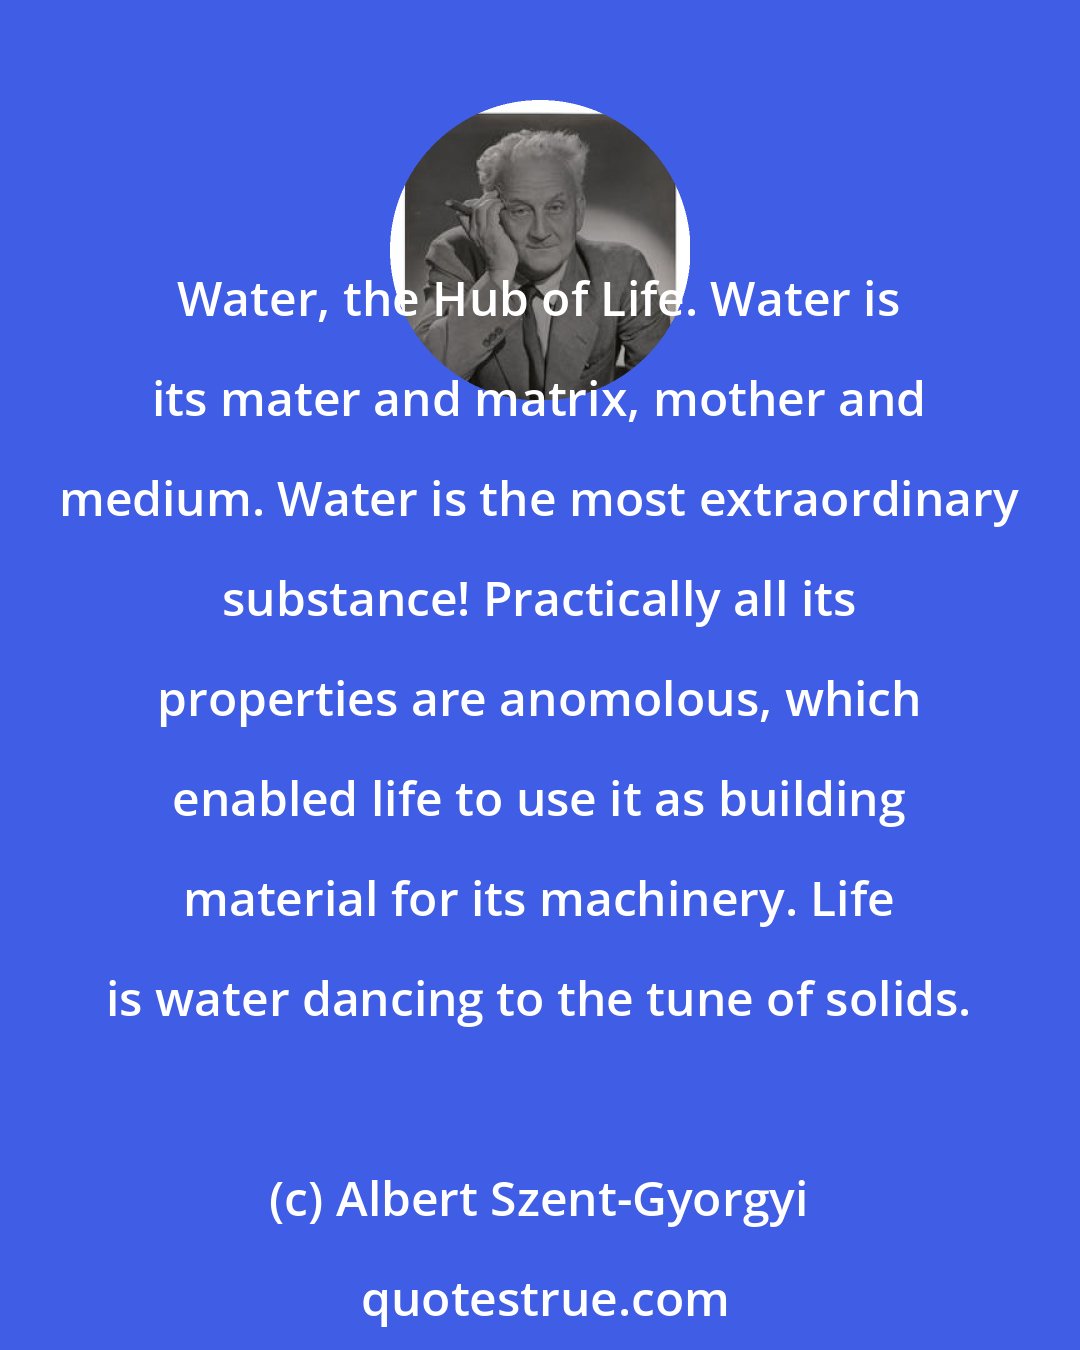 Albert Szent-Gyorgyi: Water, the Hub of Life. Water is its mater and matrix, mother and medium. Water is the most extraordinary substance! Practically all its properties are anomolous, which enabled life to use it as building material for its machinery. Life is water dancing to the tune of solids.